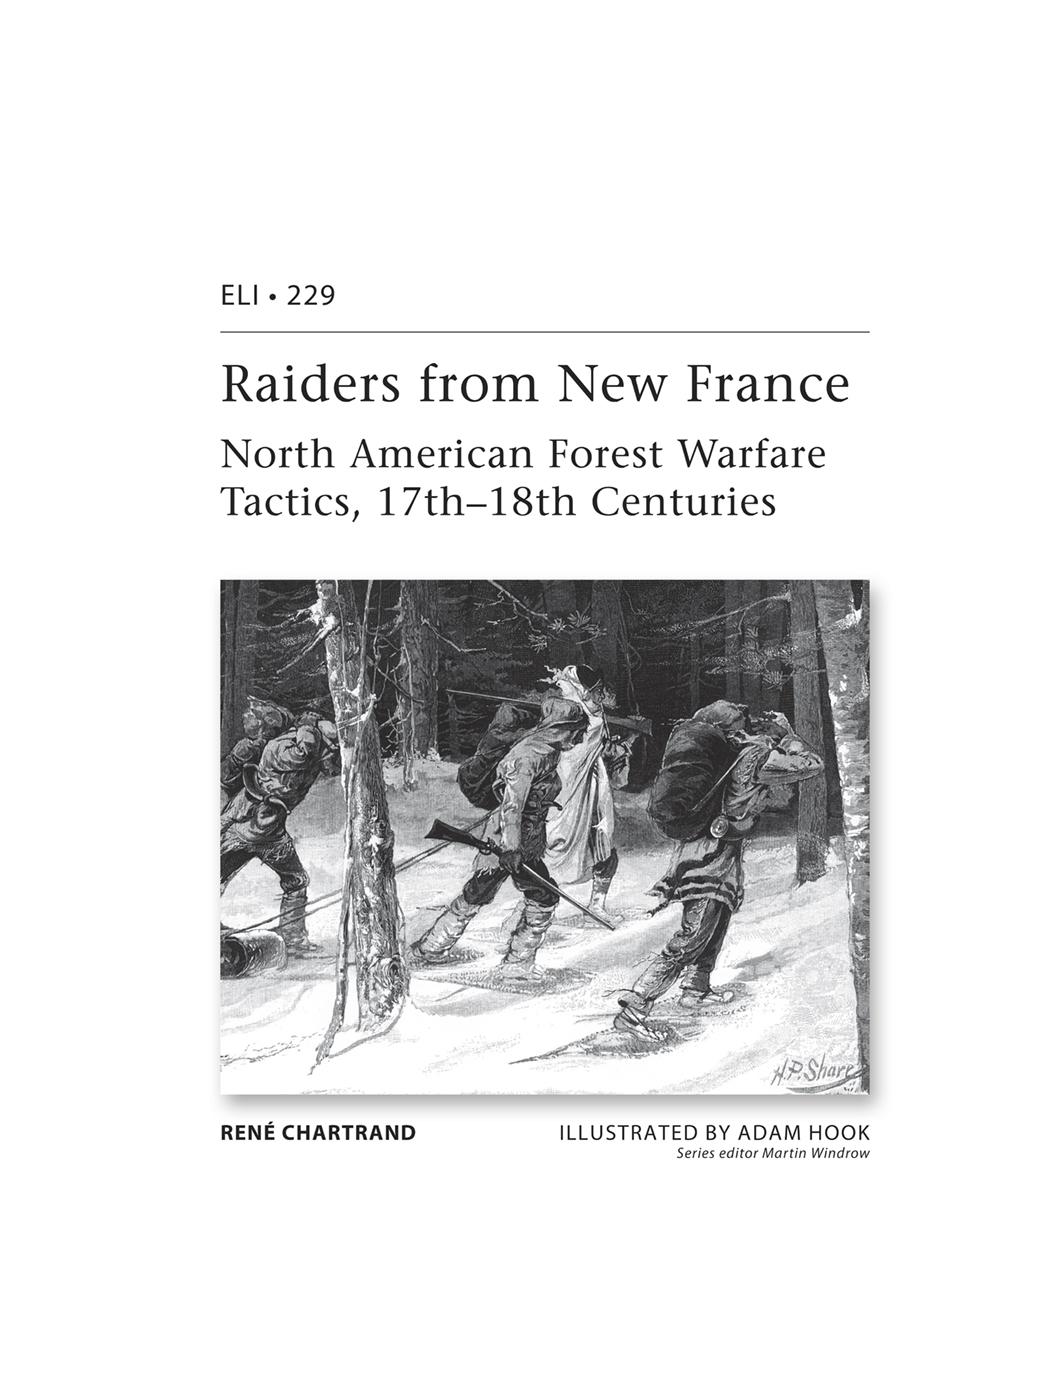 RAIDERS FROM NEW FRANCE NORTH AMERICAN FOREST WARFARE TACTICS 17th-18th - photo 2